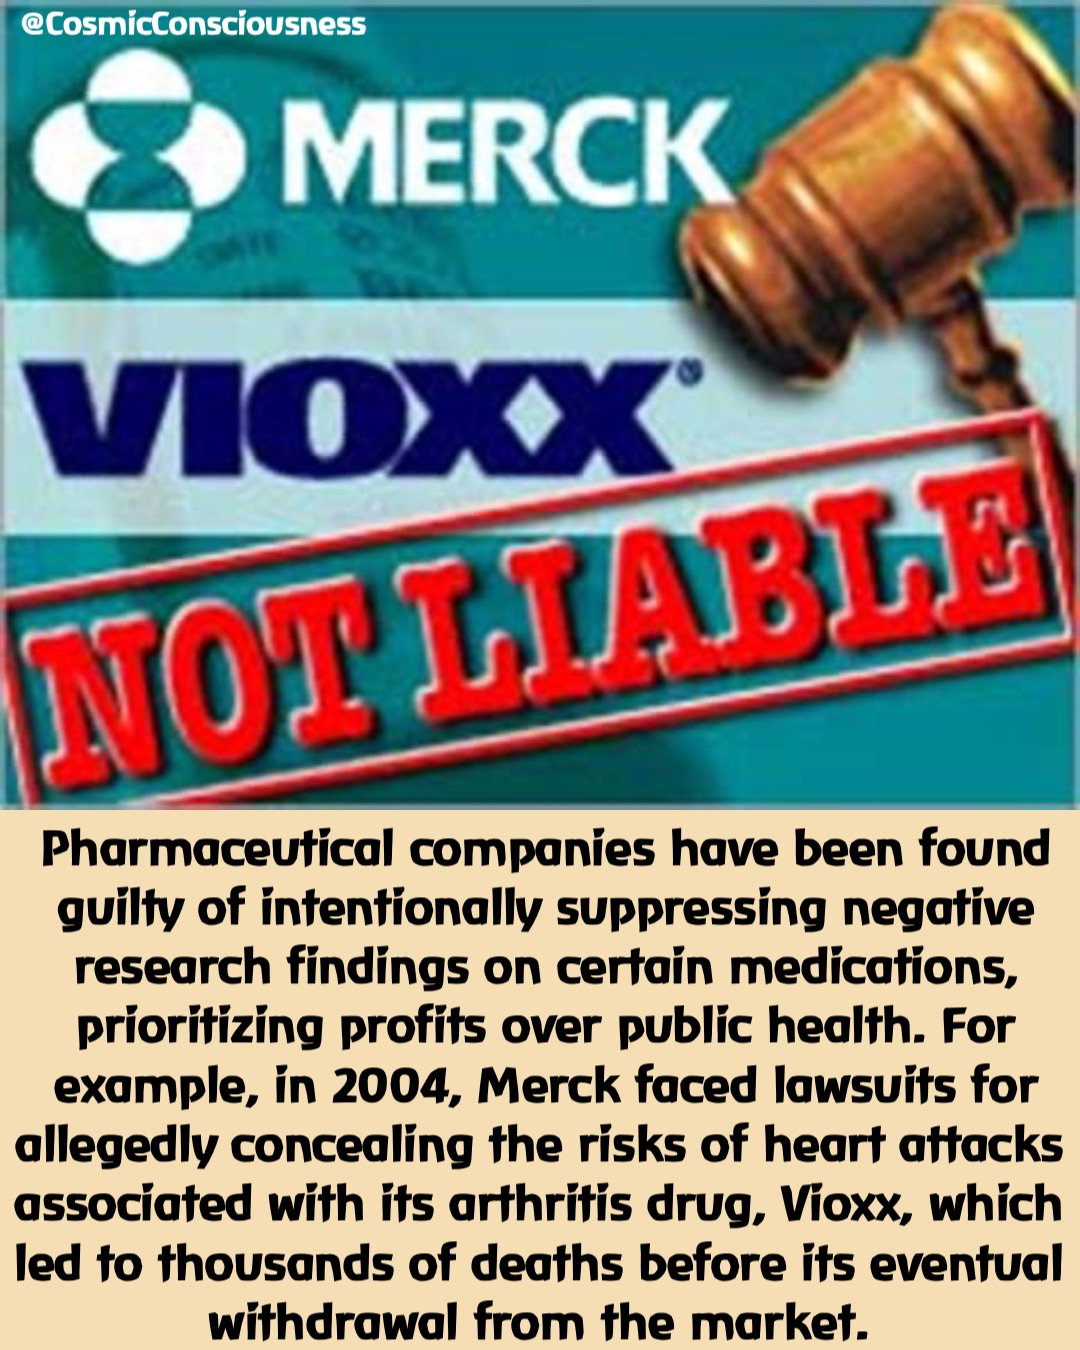 Pharmaceutical companies have been found guilty of intentionally suppressing negative research findings on certain medications, prioritizing profits over public health. For example, in 2004, Merck faced lawsuits for allegedly concealing the risks of heart attacks associated with its arthritis drug, Vioxx, which led to thousands of deaths before its eventual withdrawal from the market. @CosmicConsciousness